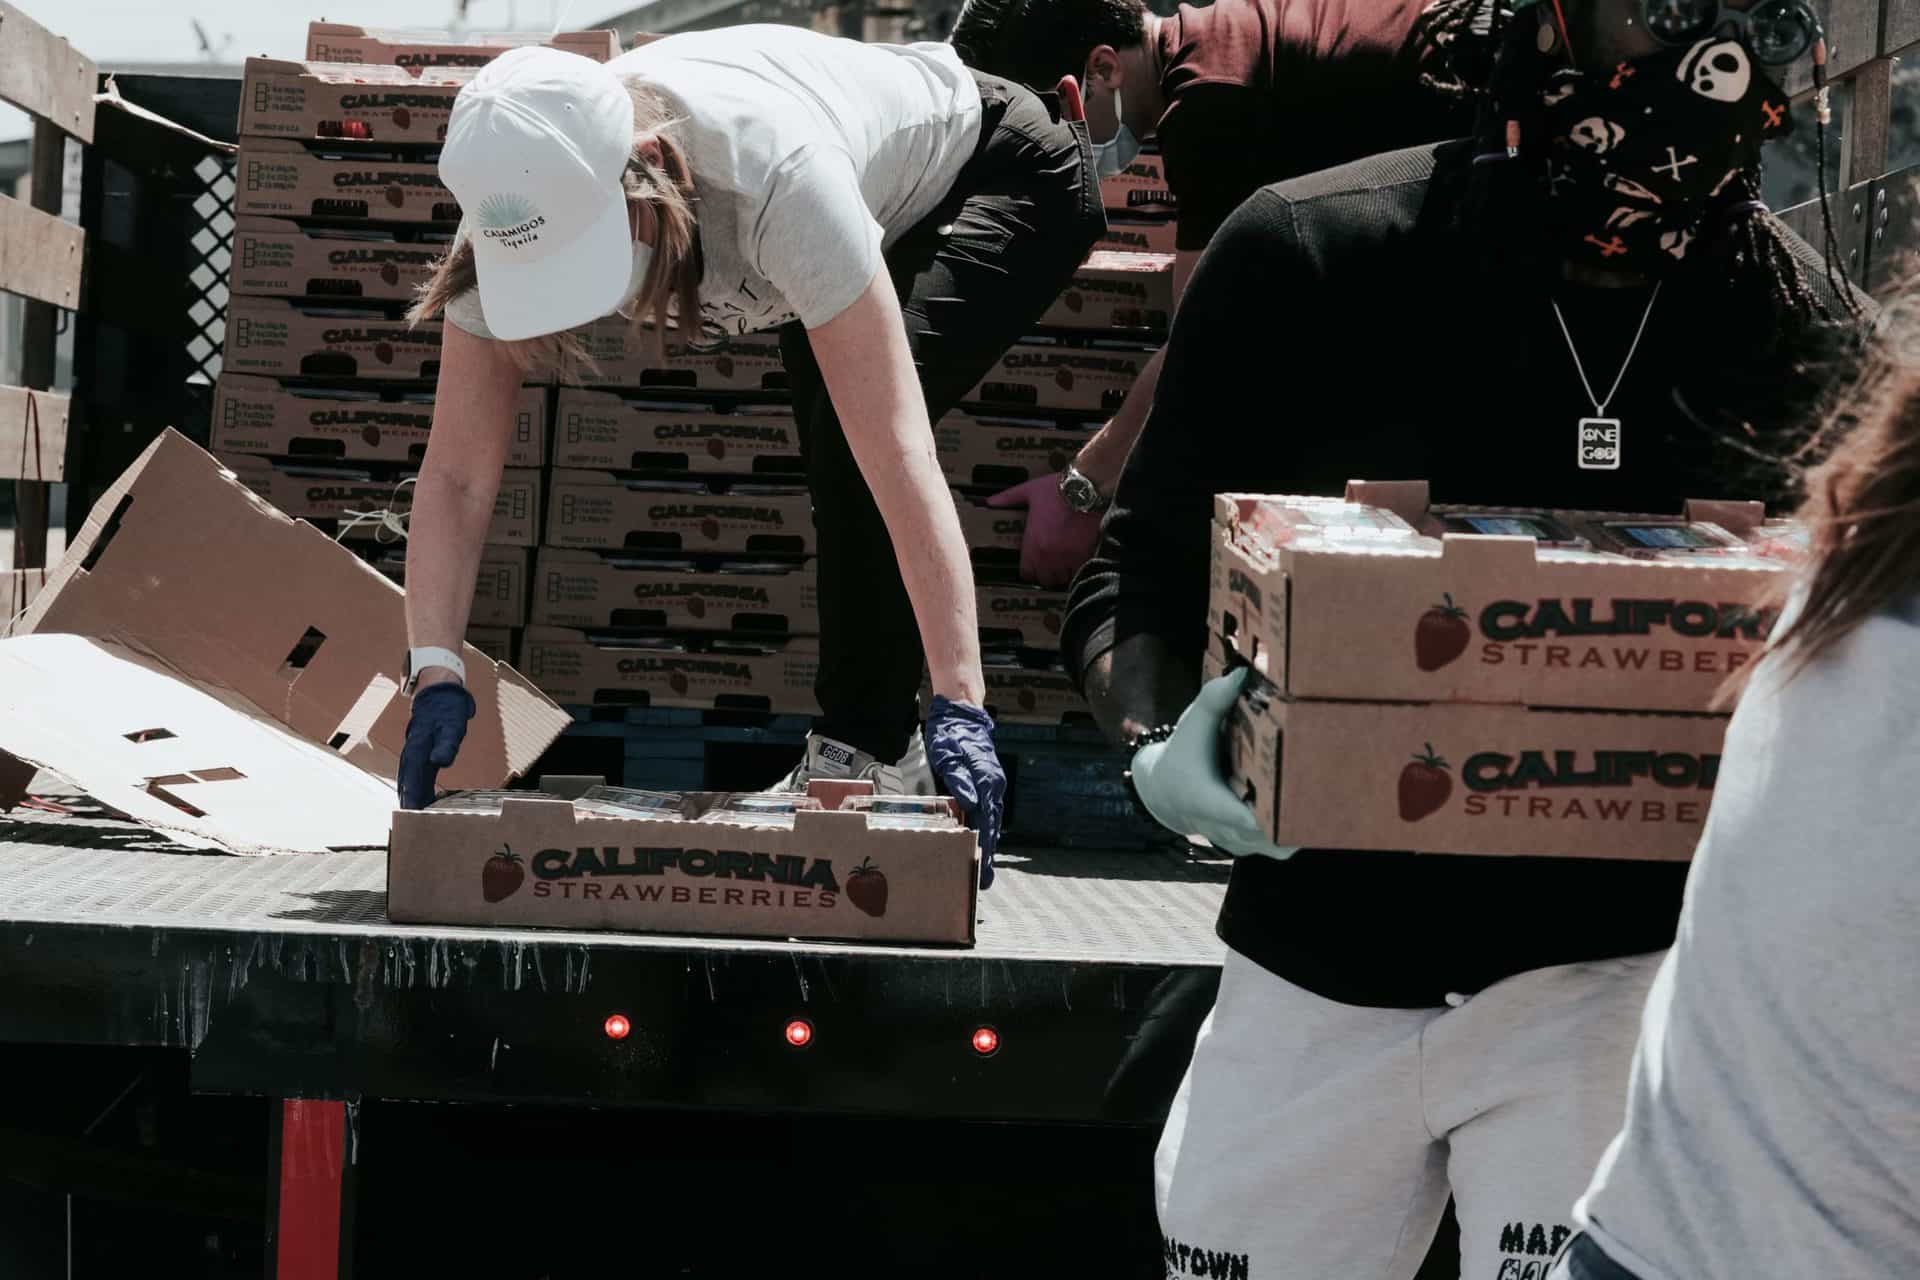 A woman bends down in the back of a truck picking up a box of food. She is wearing a white hat, white shirt and green pants. A man is walking away from the truck carrying boxes of food. It looks as if they are working at a food bank